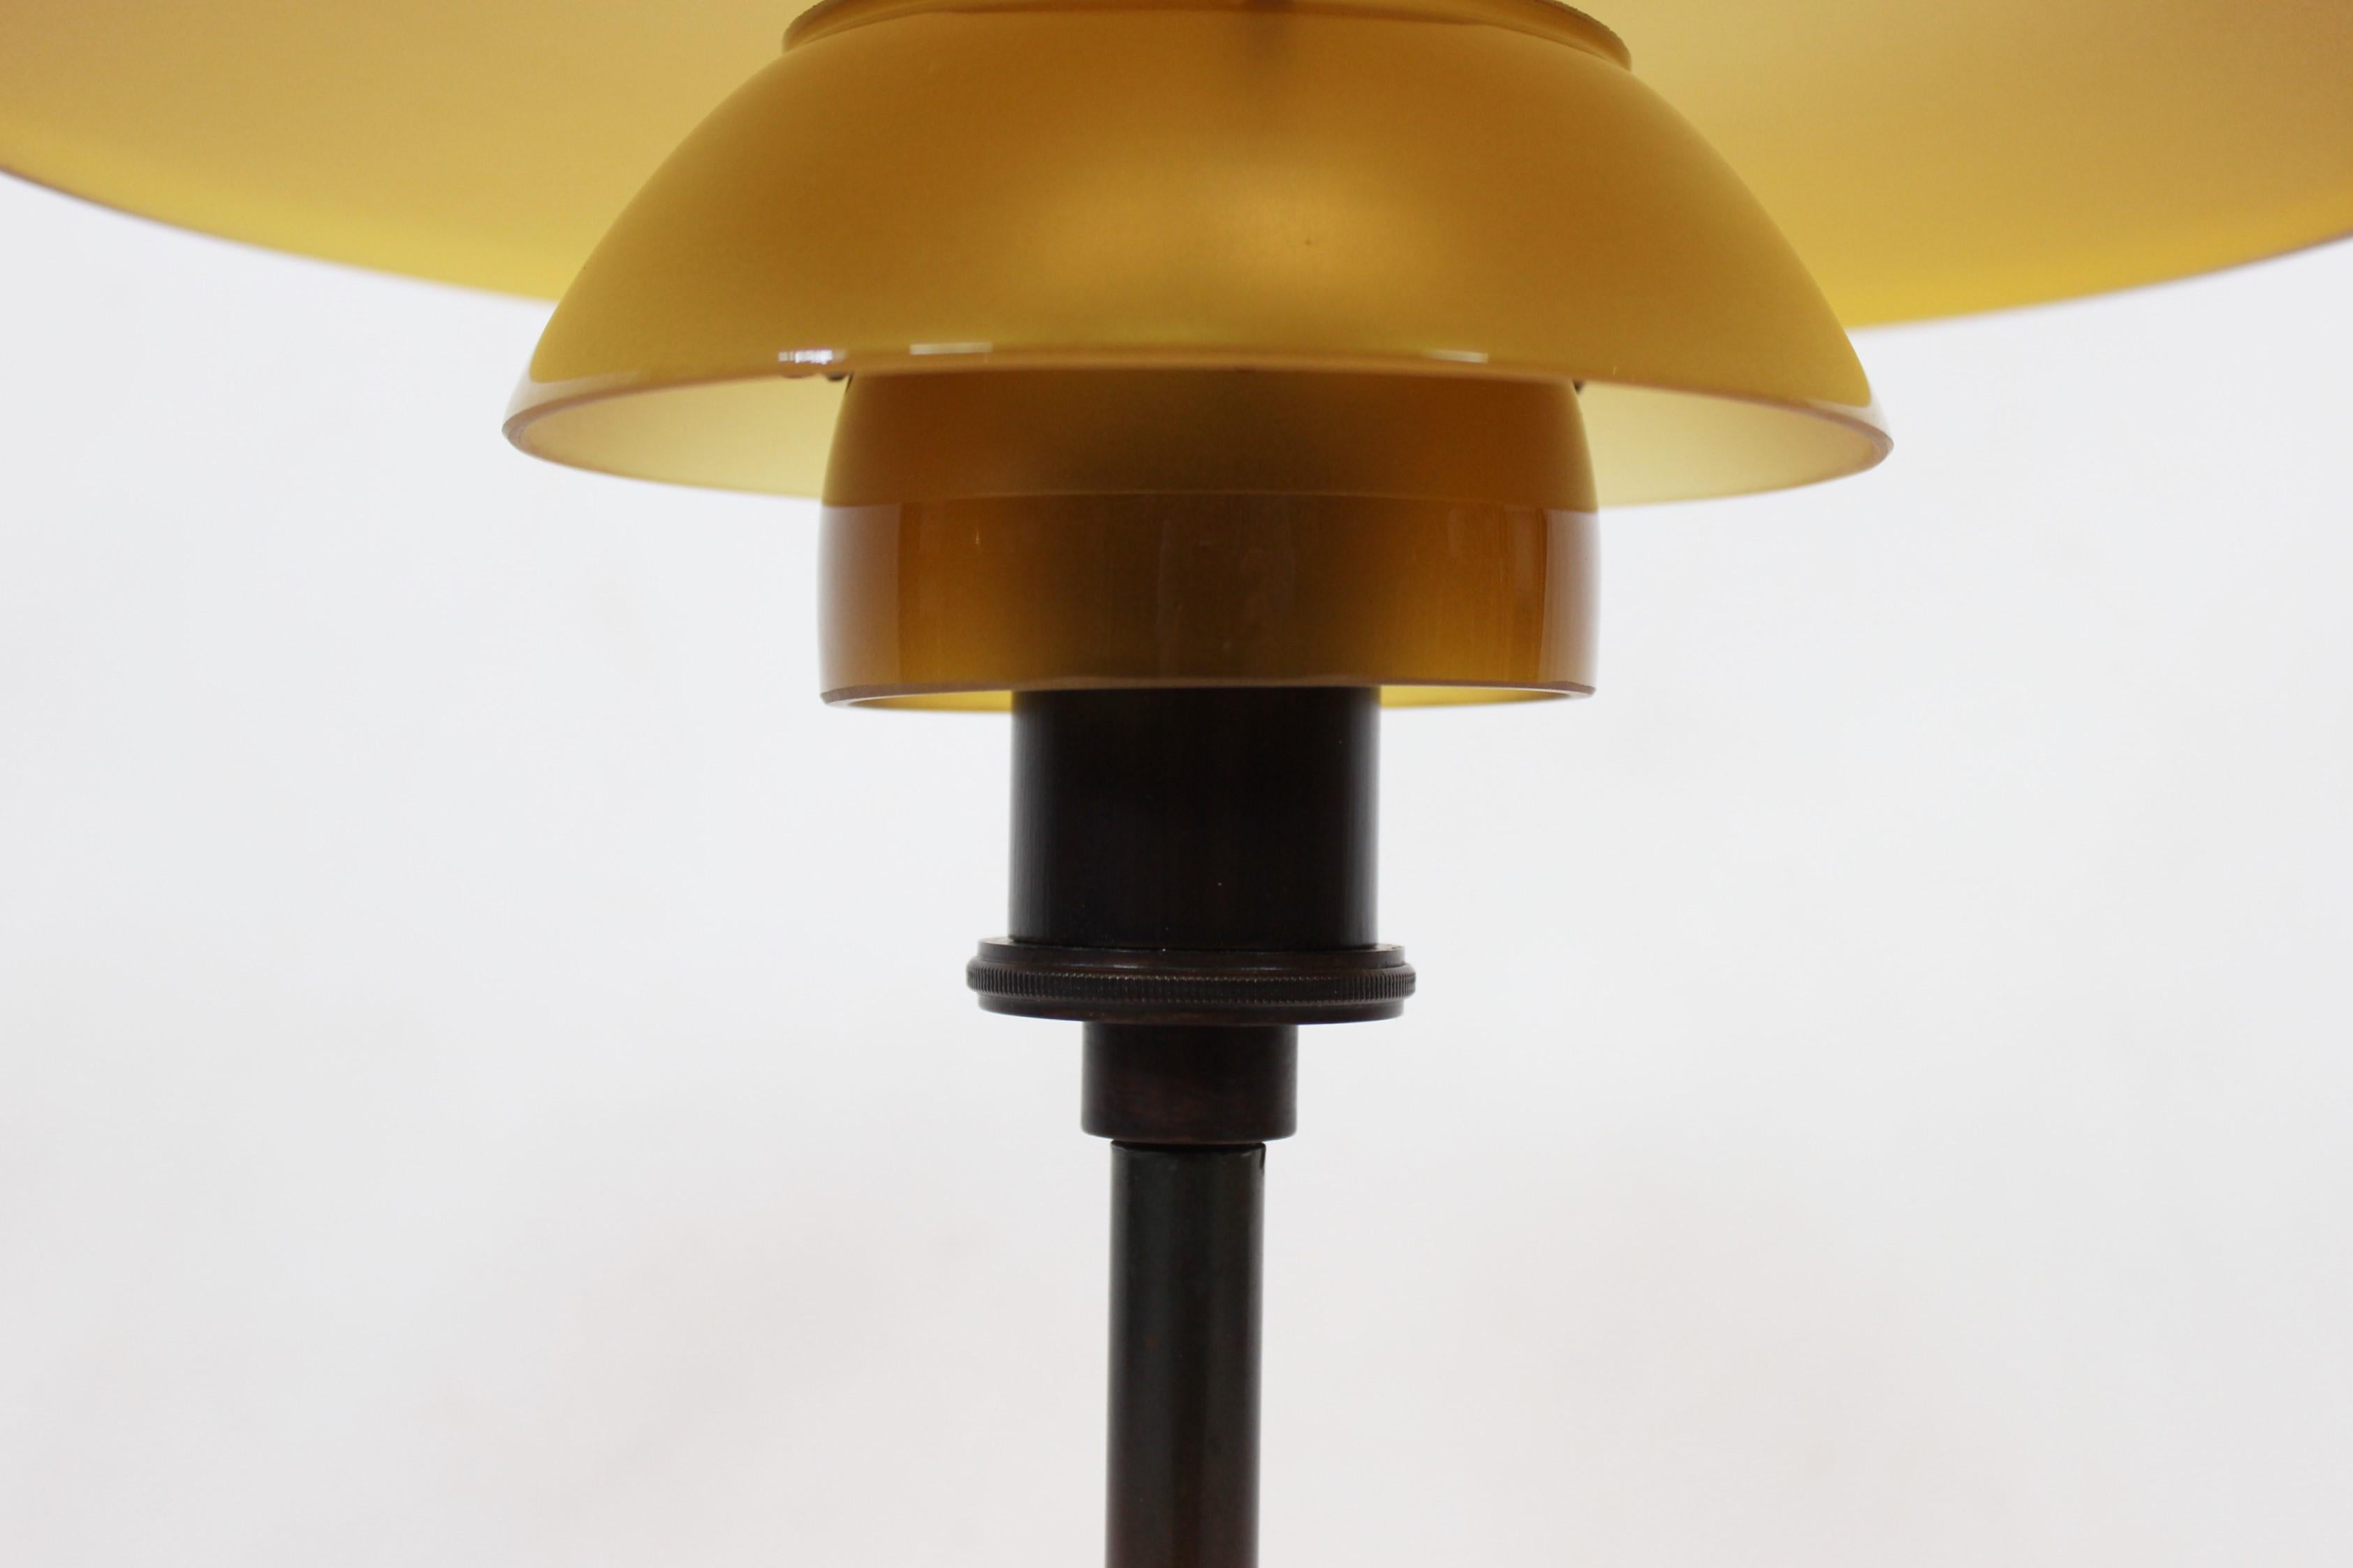 Burnished PH 3/2 Tablelamp with Shades of Amber Colored Glass, 1930s